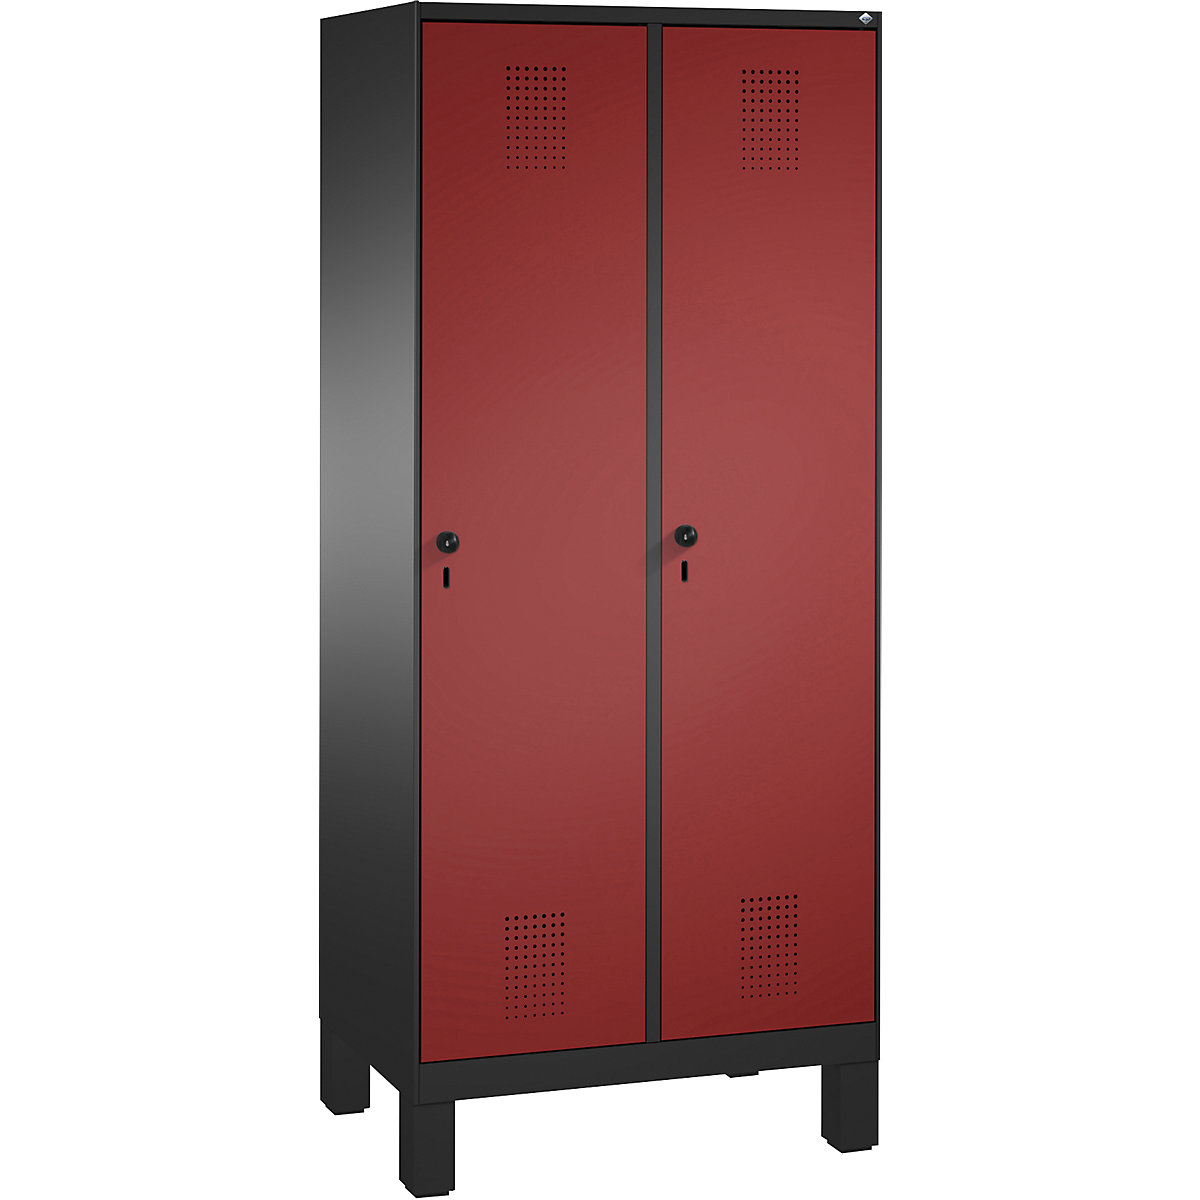 EVOLO cloakroom locker, with feet – C+P, 2 compartments, compartment width 400 mm, black grey / ruby red-12